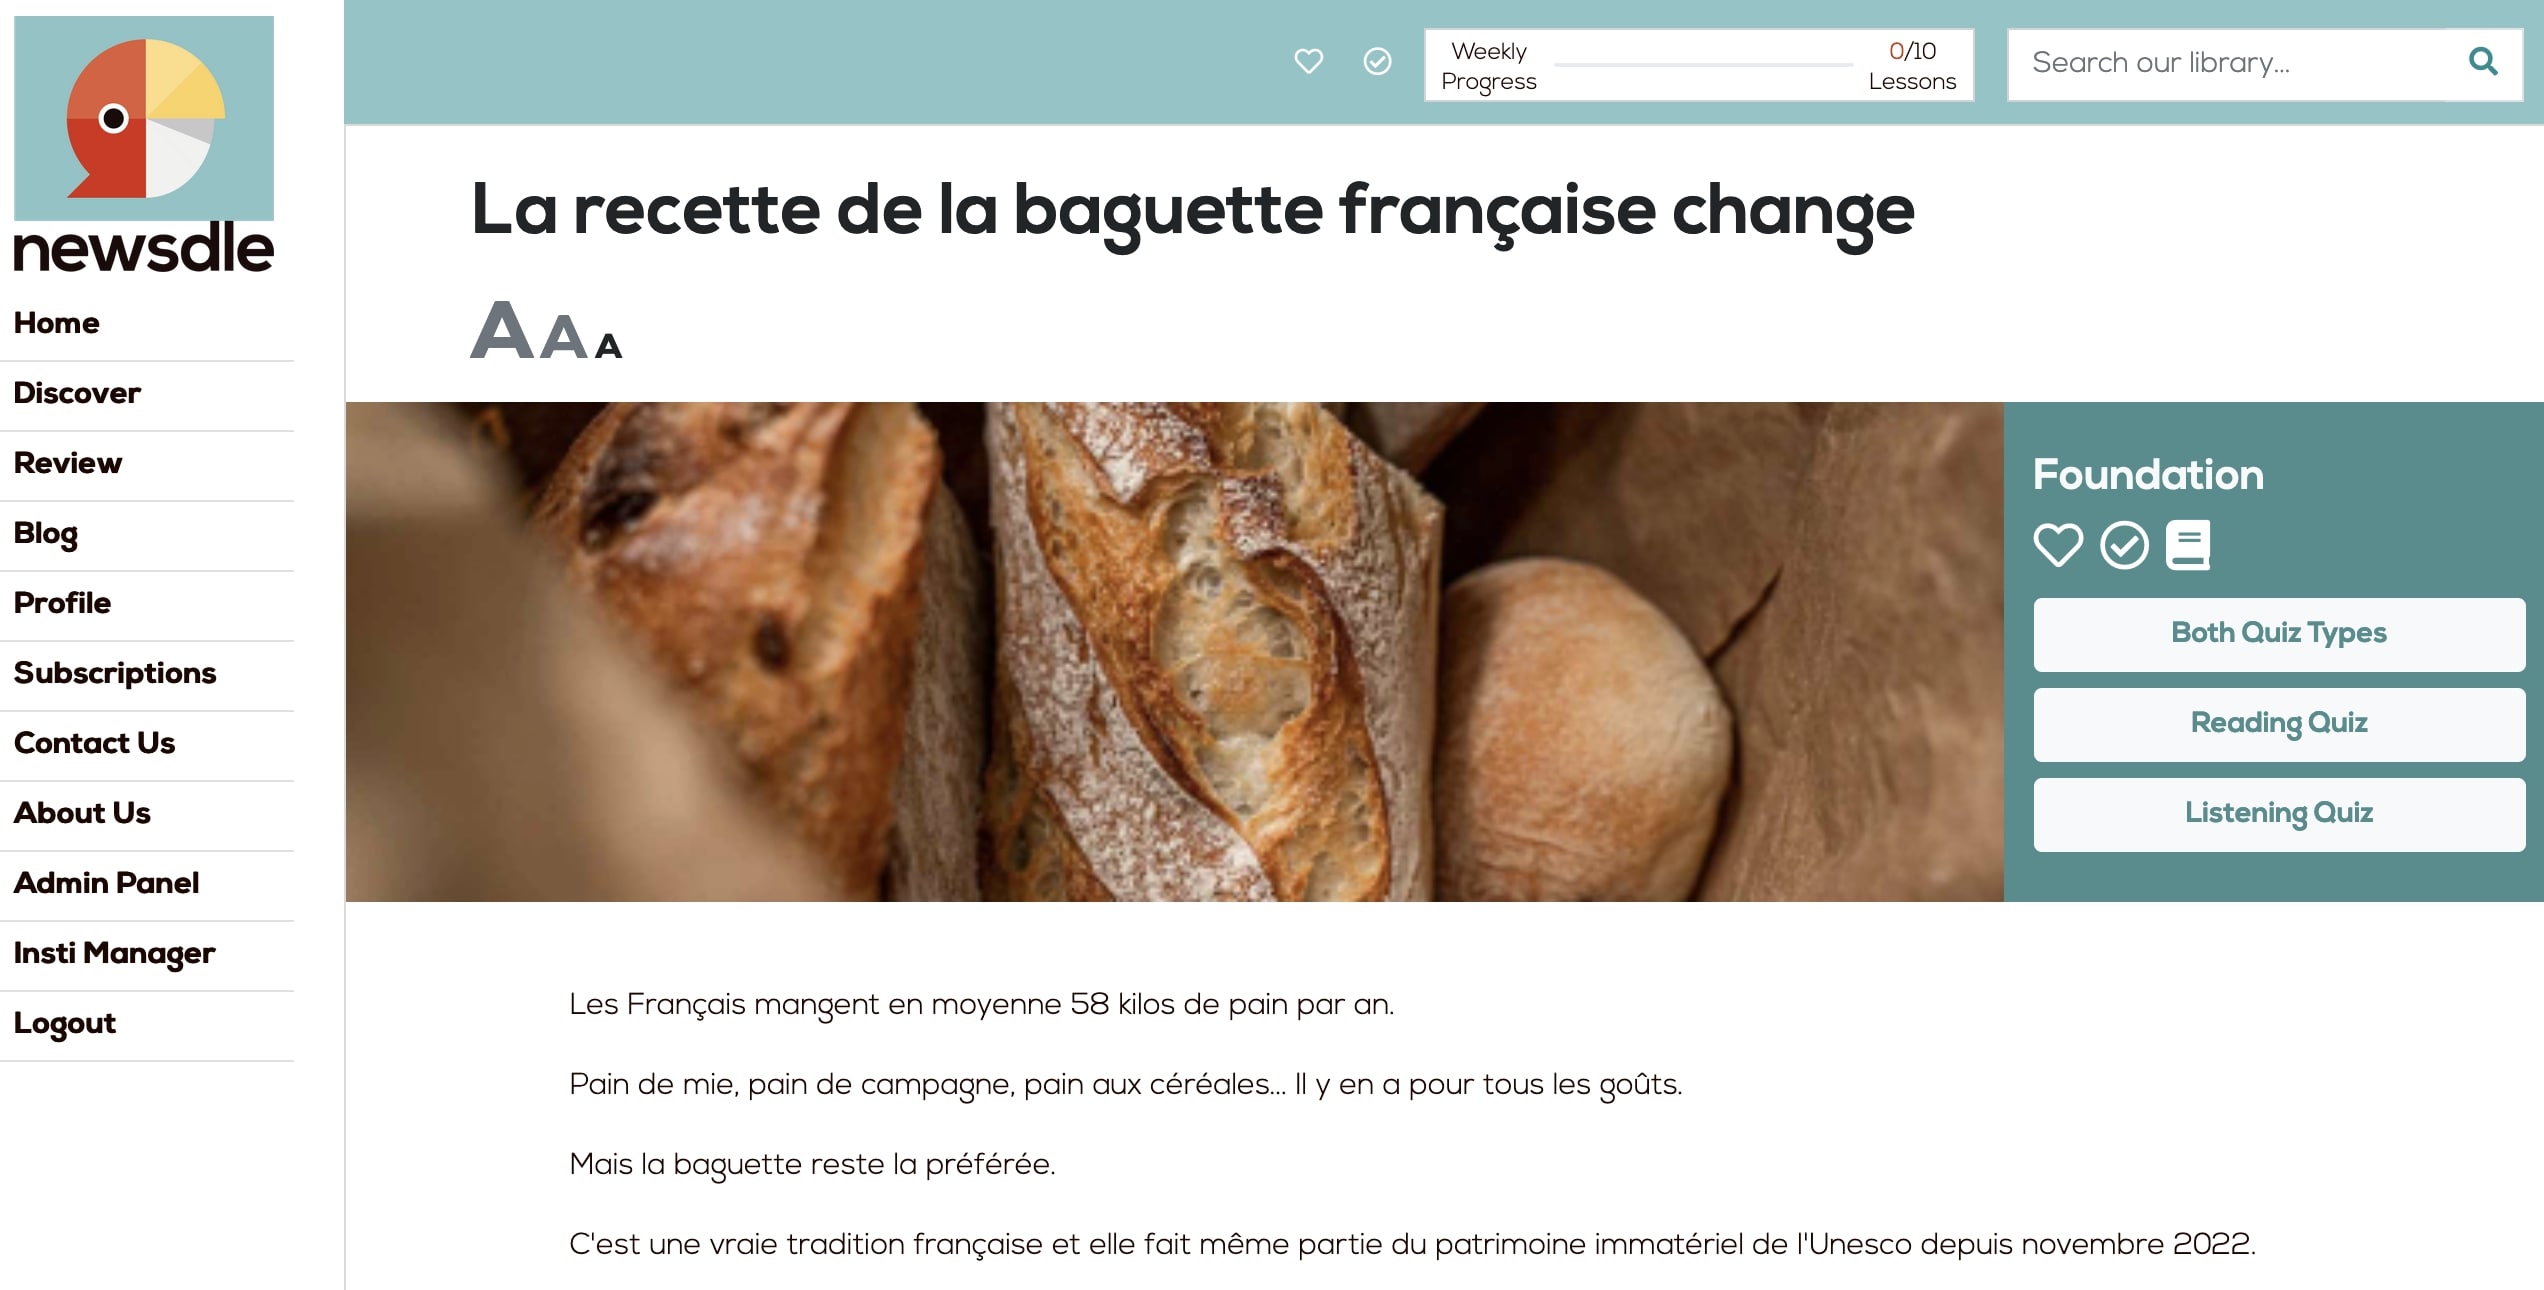 Newsdle - News to Learn French